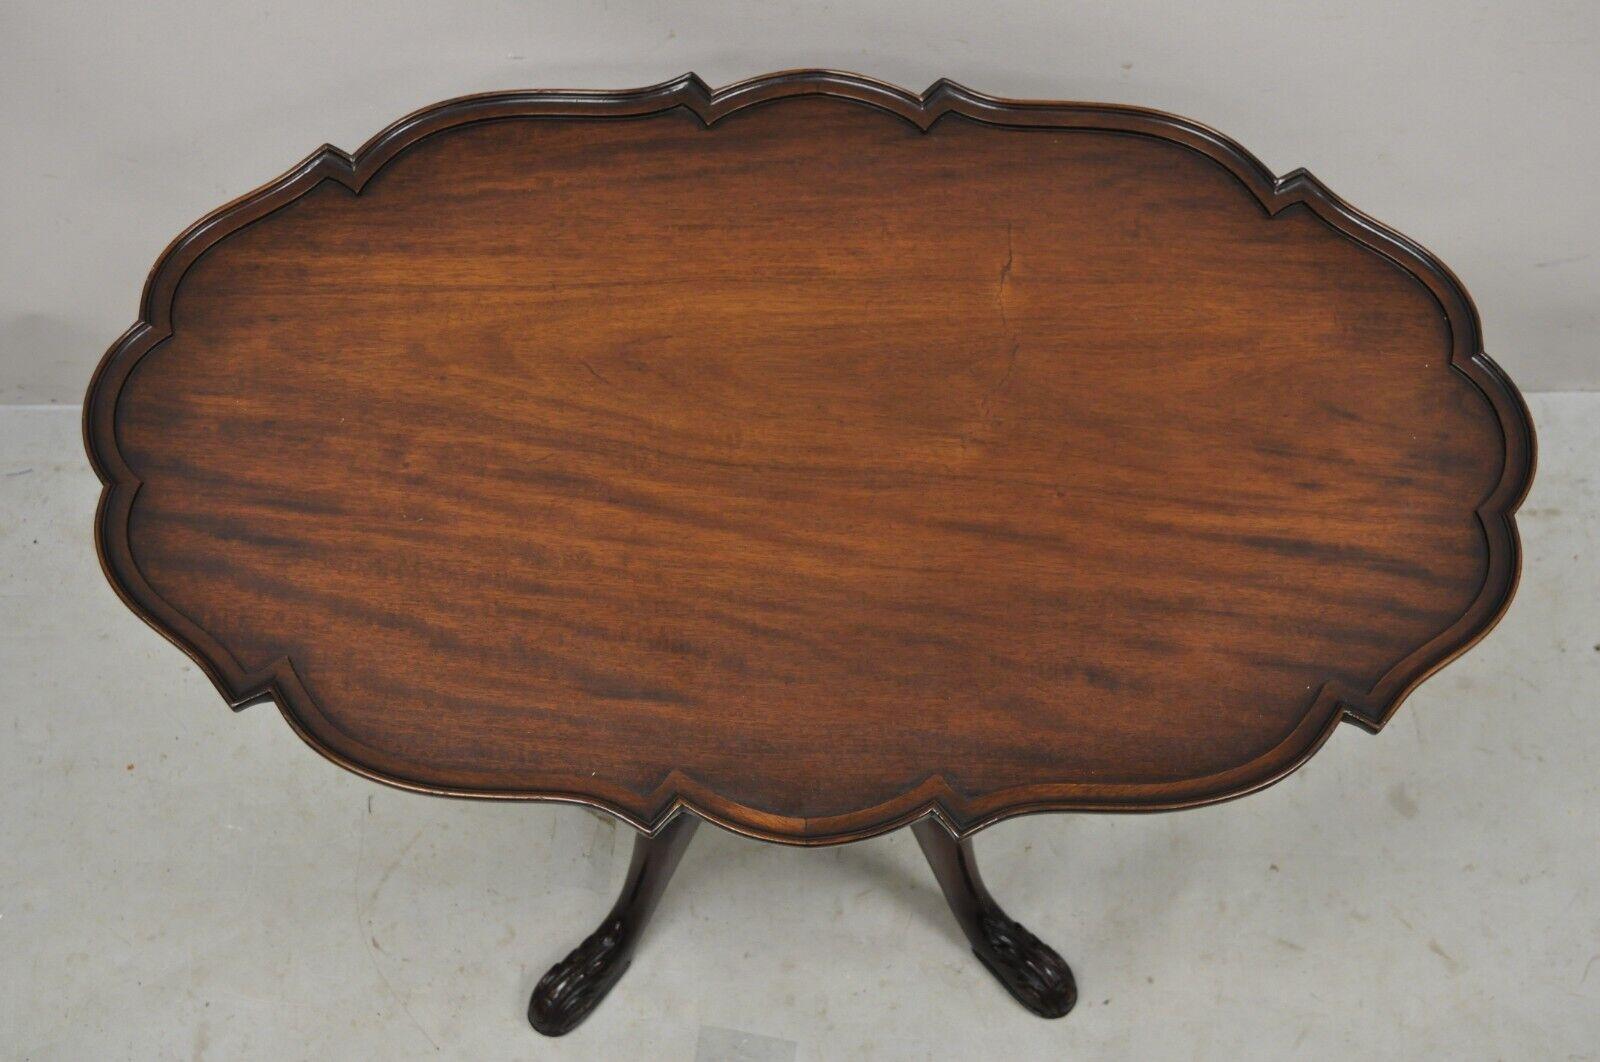 20th Century Mahogany Chippendale Style Tilt Top Pedestal Base Scalloped Oval Coffee Table